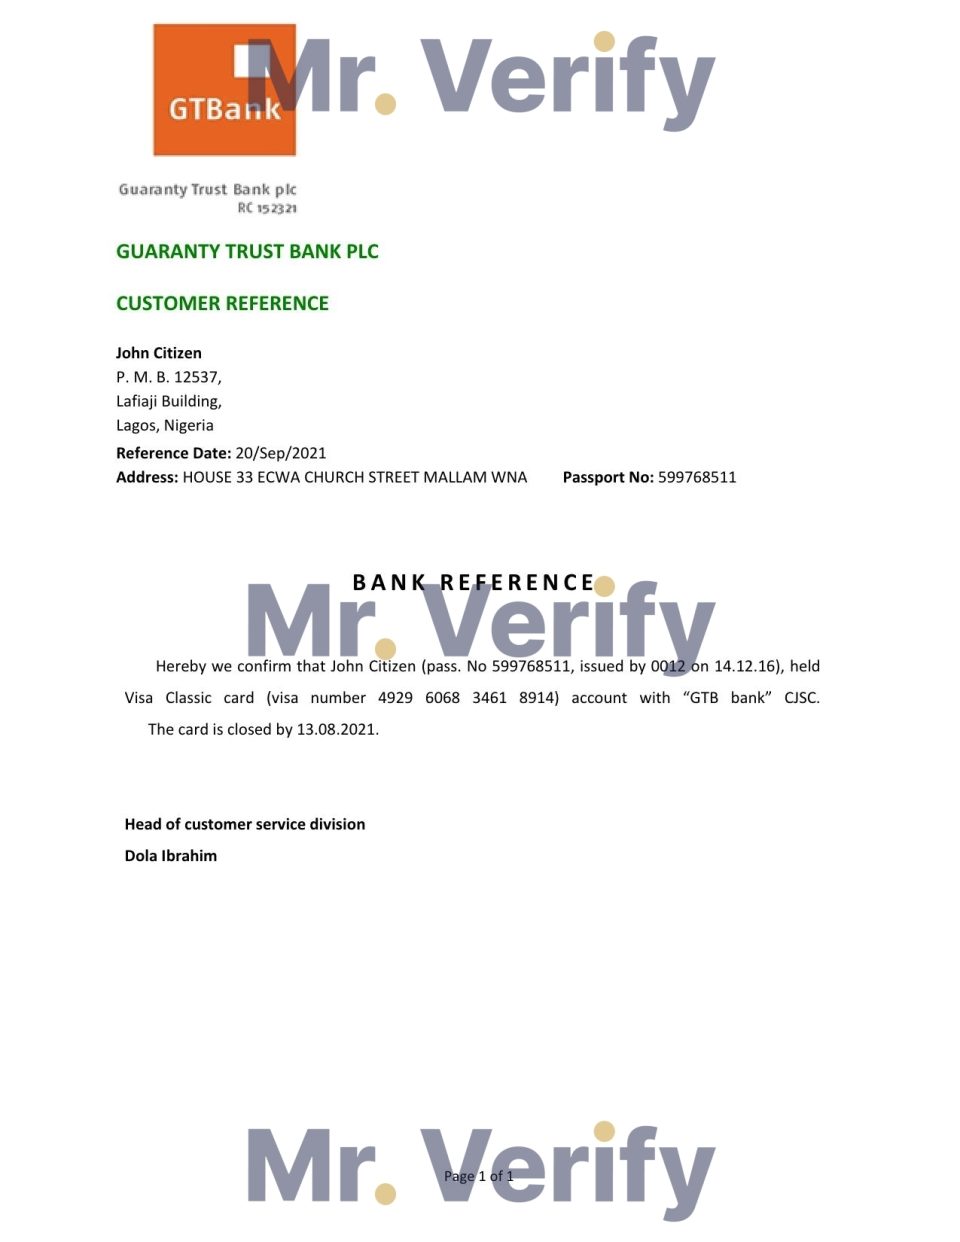 Download Nigeria GTBank Bank Reference Letter Templates | Editable Word